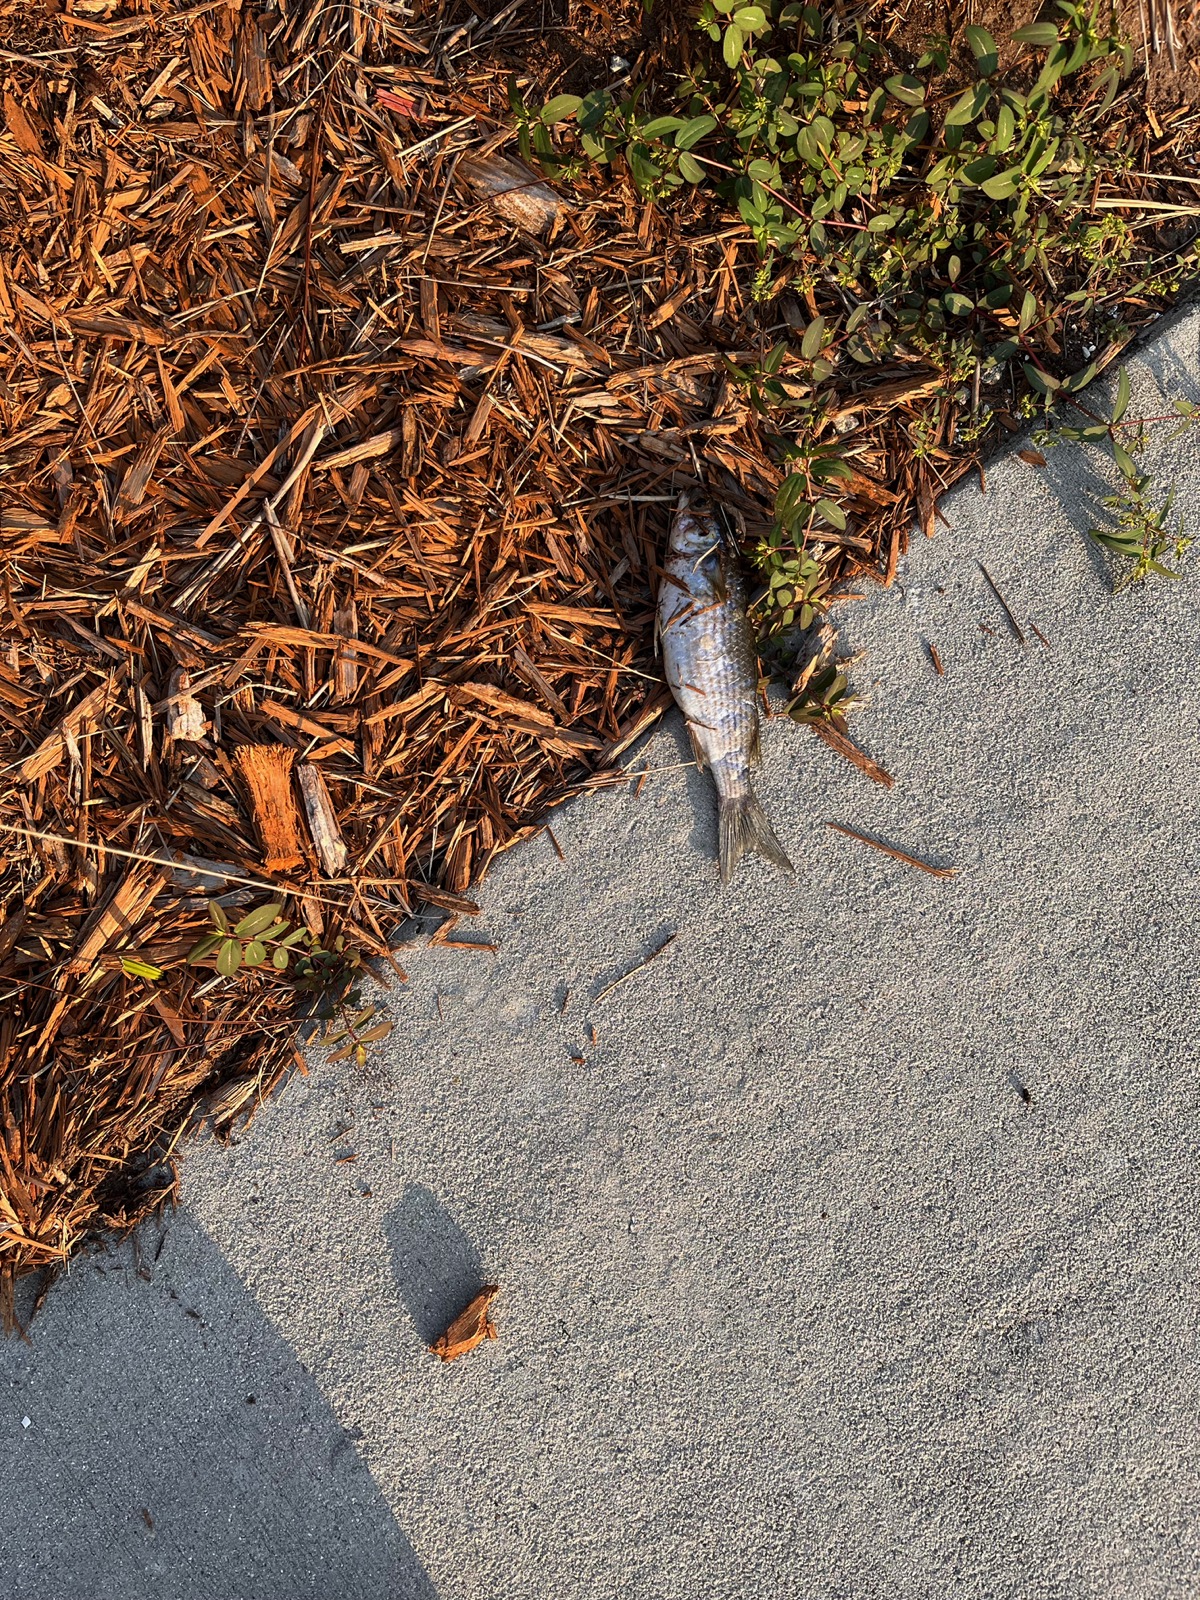 Photo of a dead fish lying on the sidewalk, probably dropped by an osprey